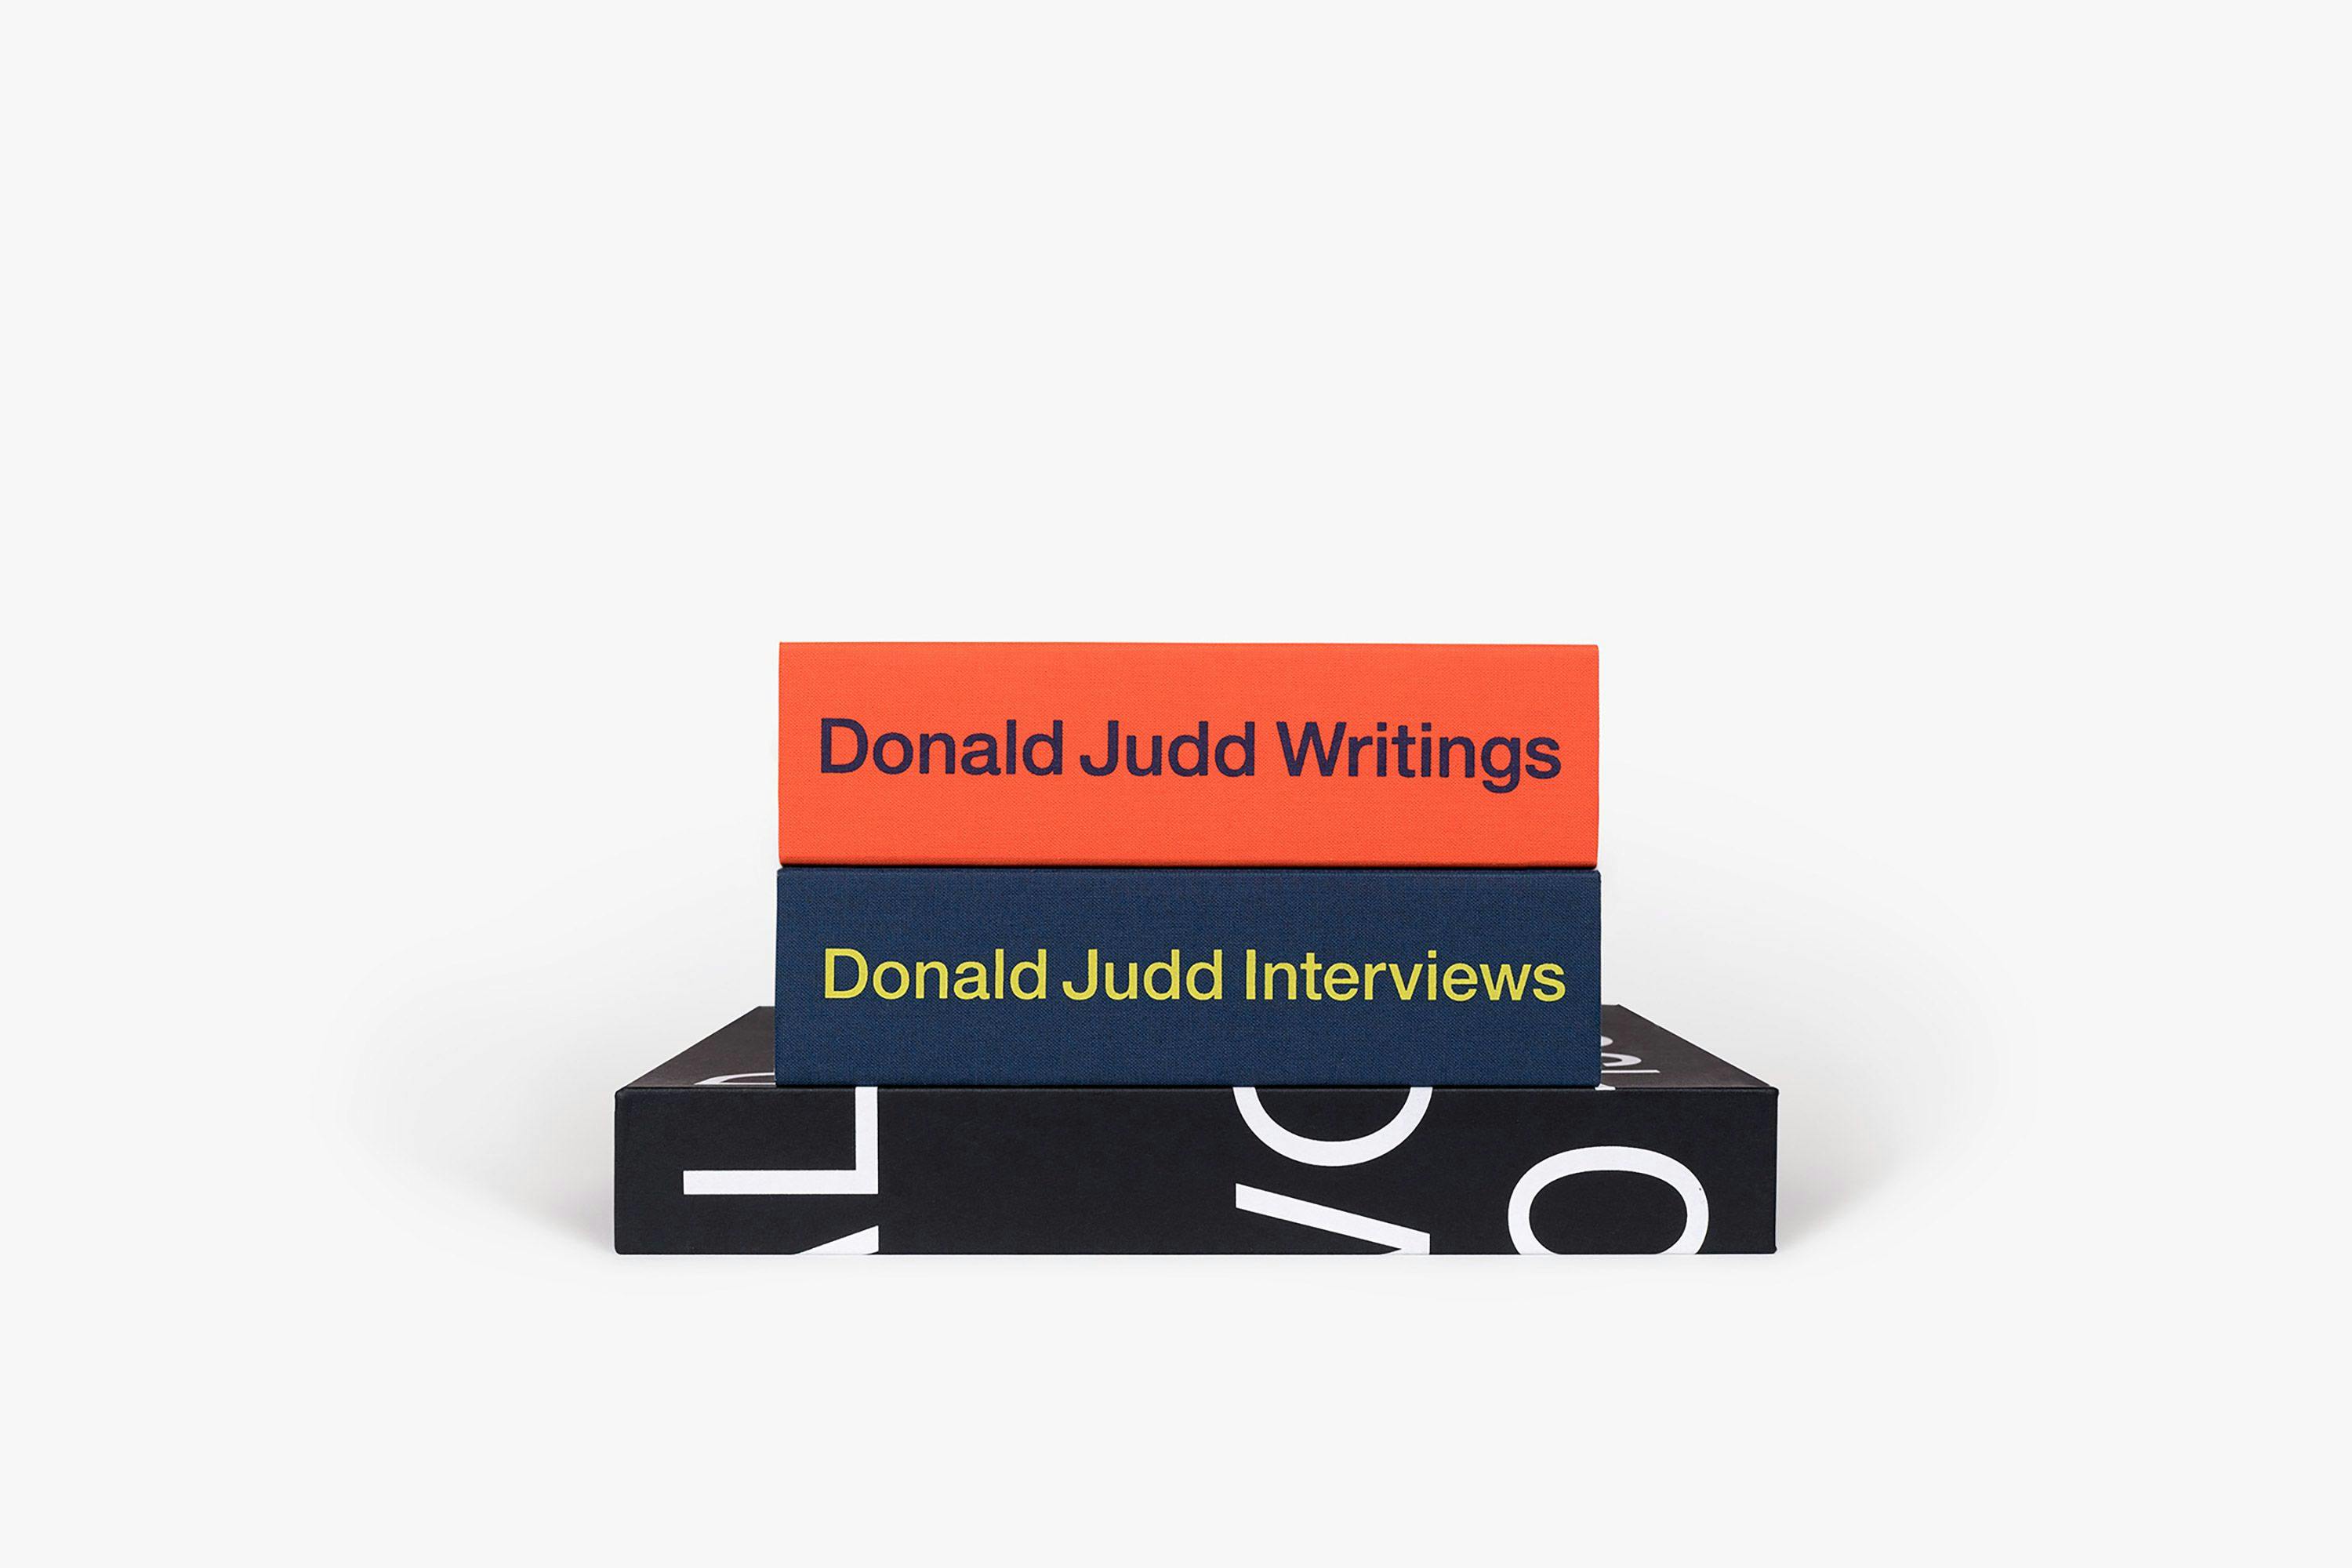 The Judd Collection